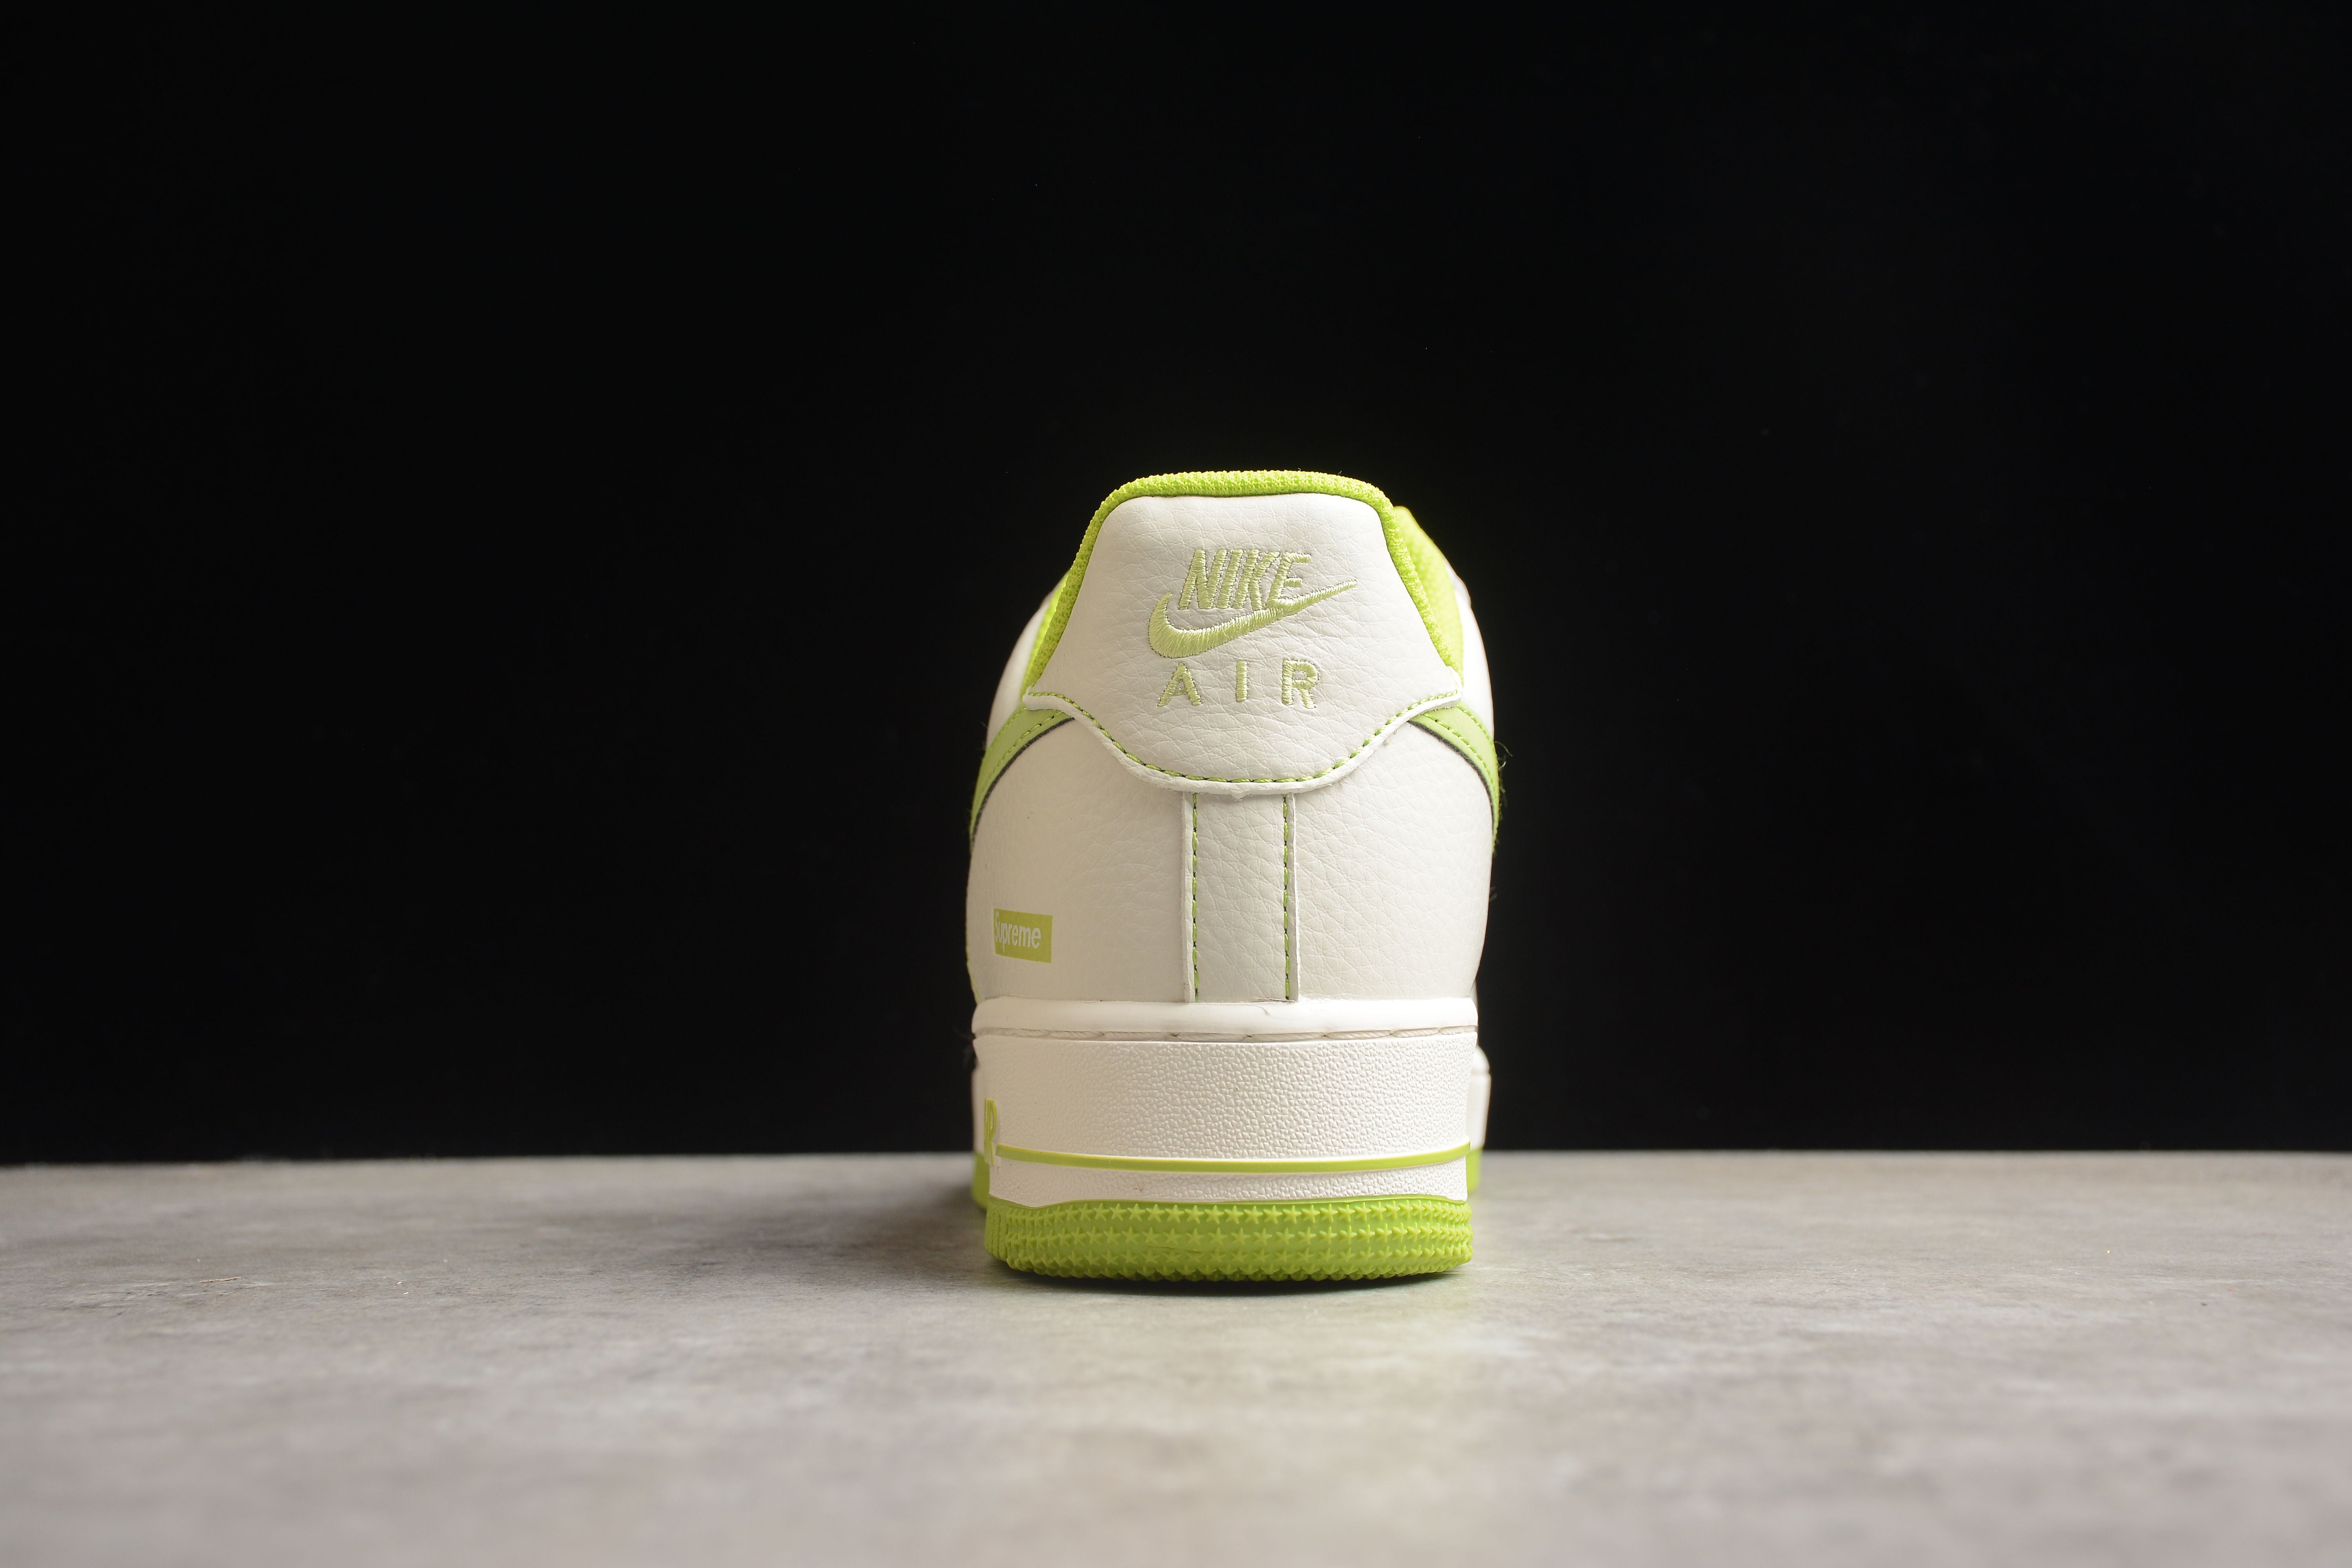 Nike airforce A1 light green shoes